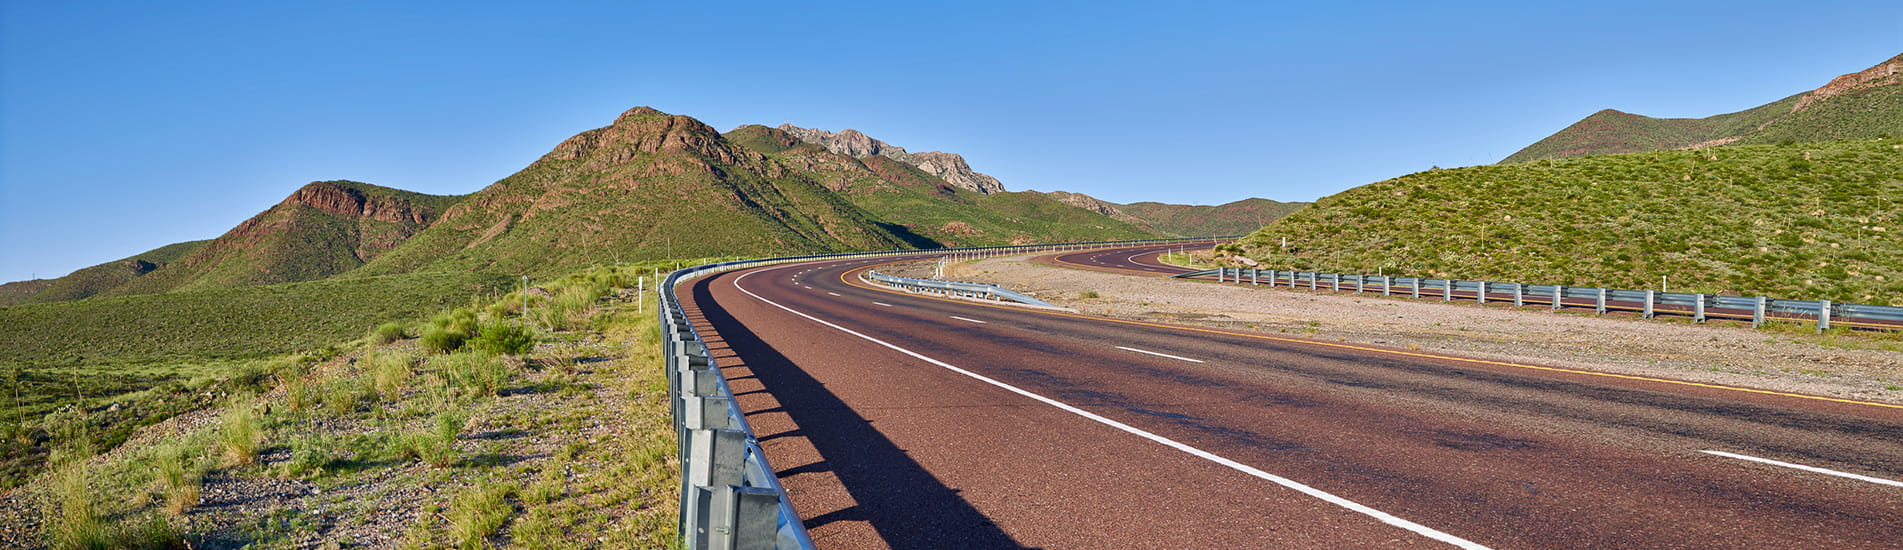 A highway road curving to the right set against a mountain range and clear blue sky.